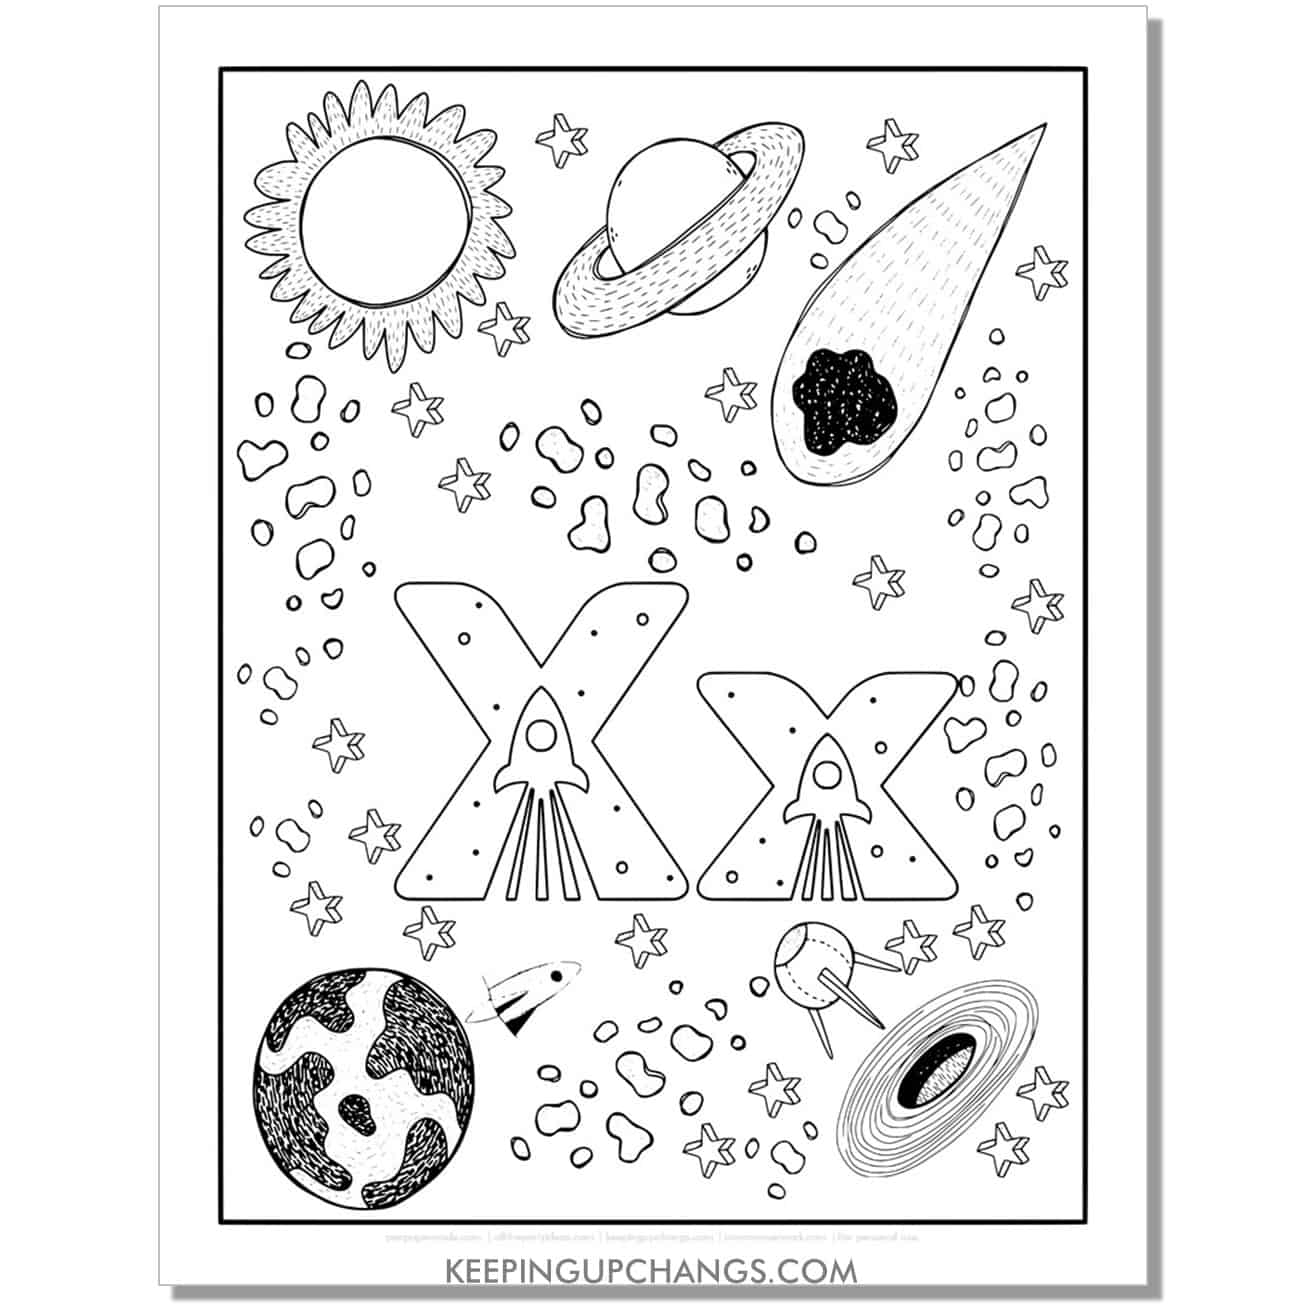 free alphabet letter x coloring page for kids with rockets, space theme.